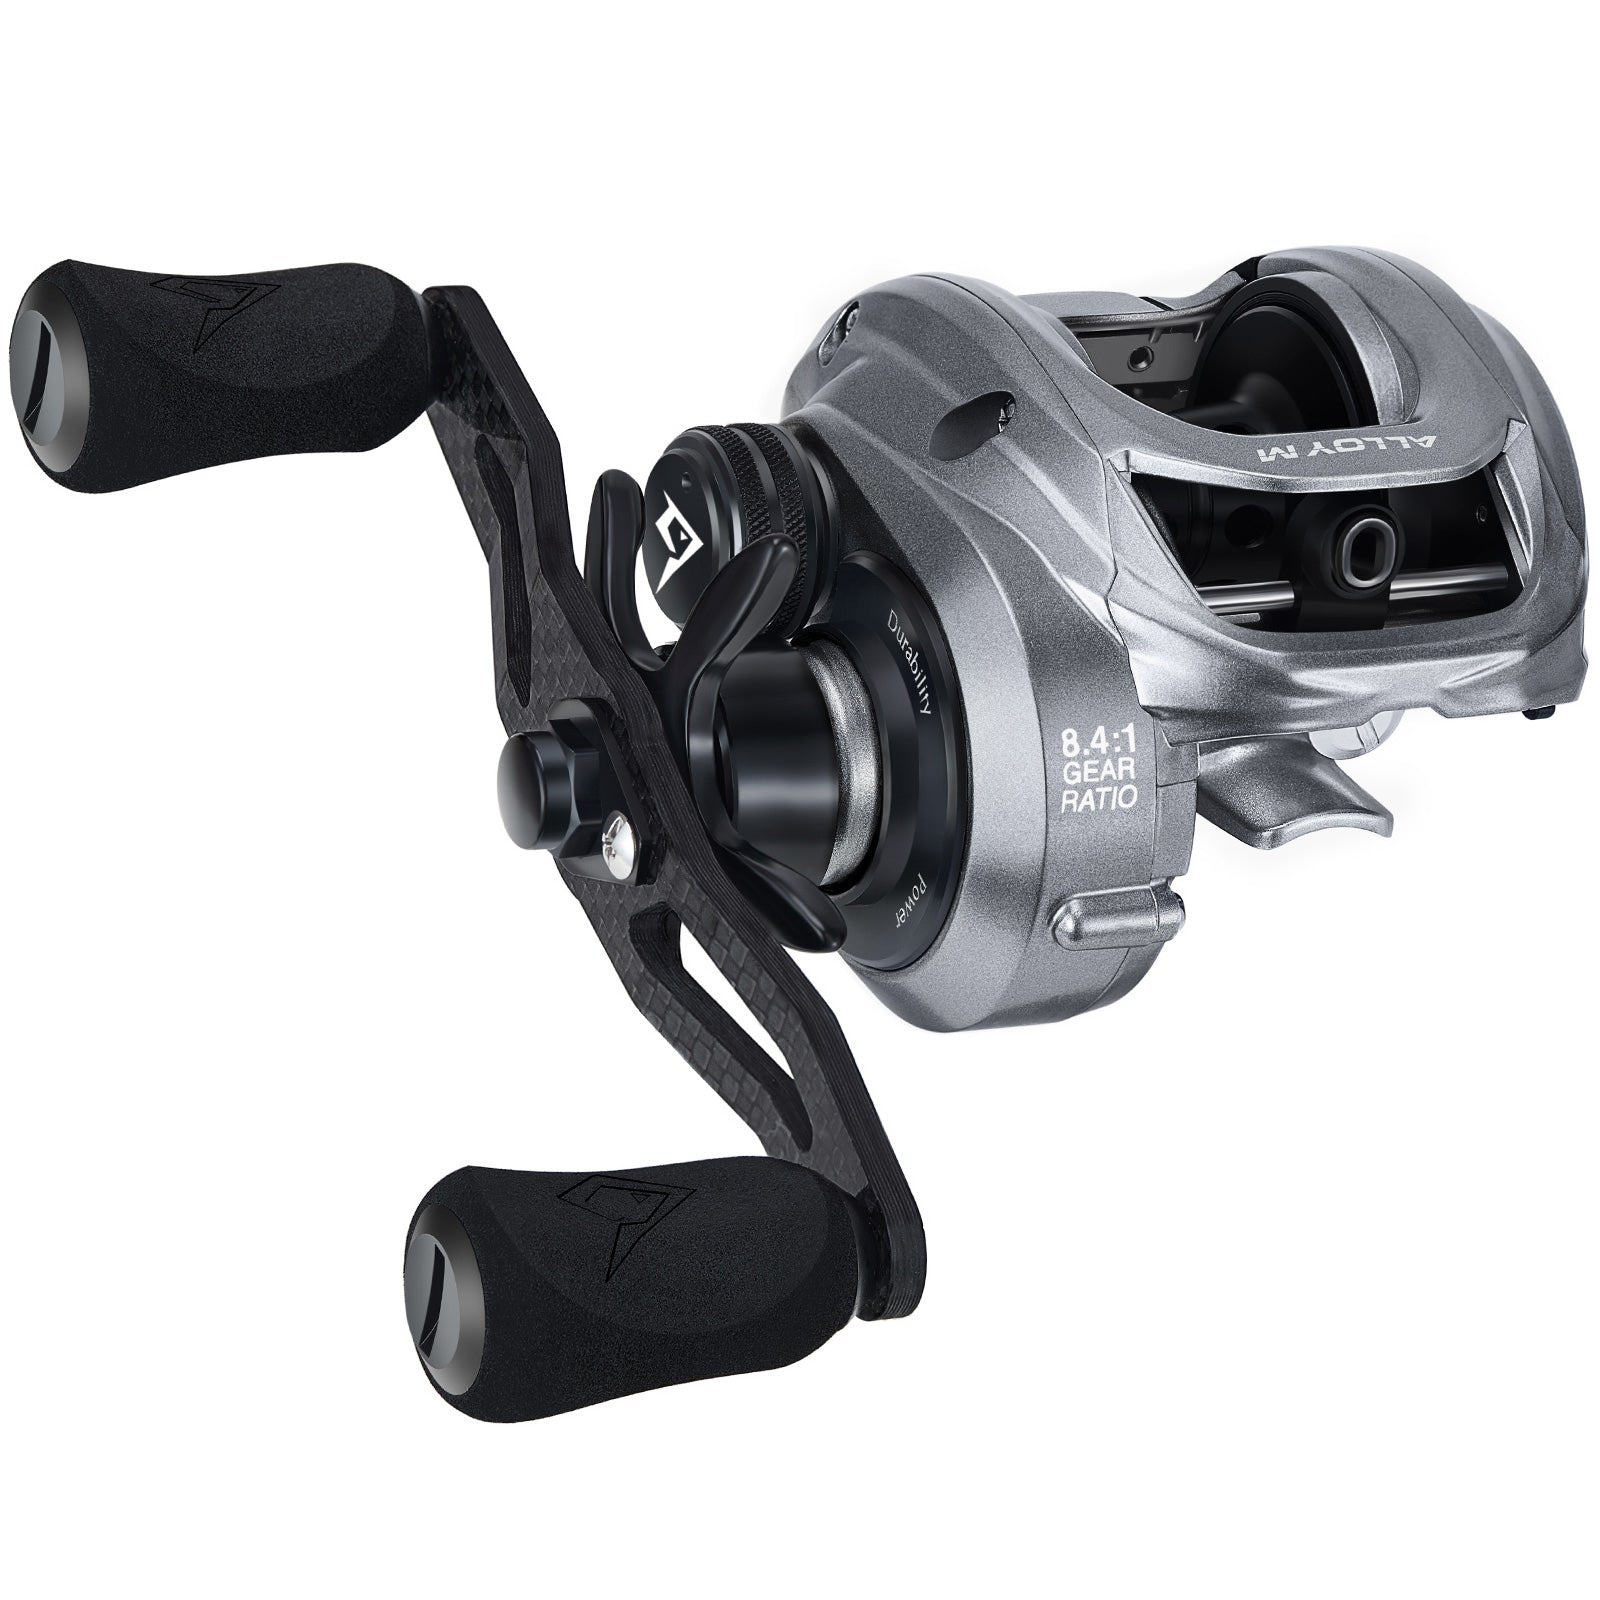 Saltwater Baitcasting Reels: Pros & Cons, When To Use Them